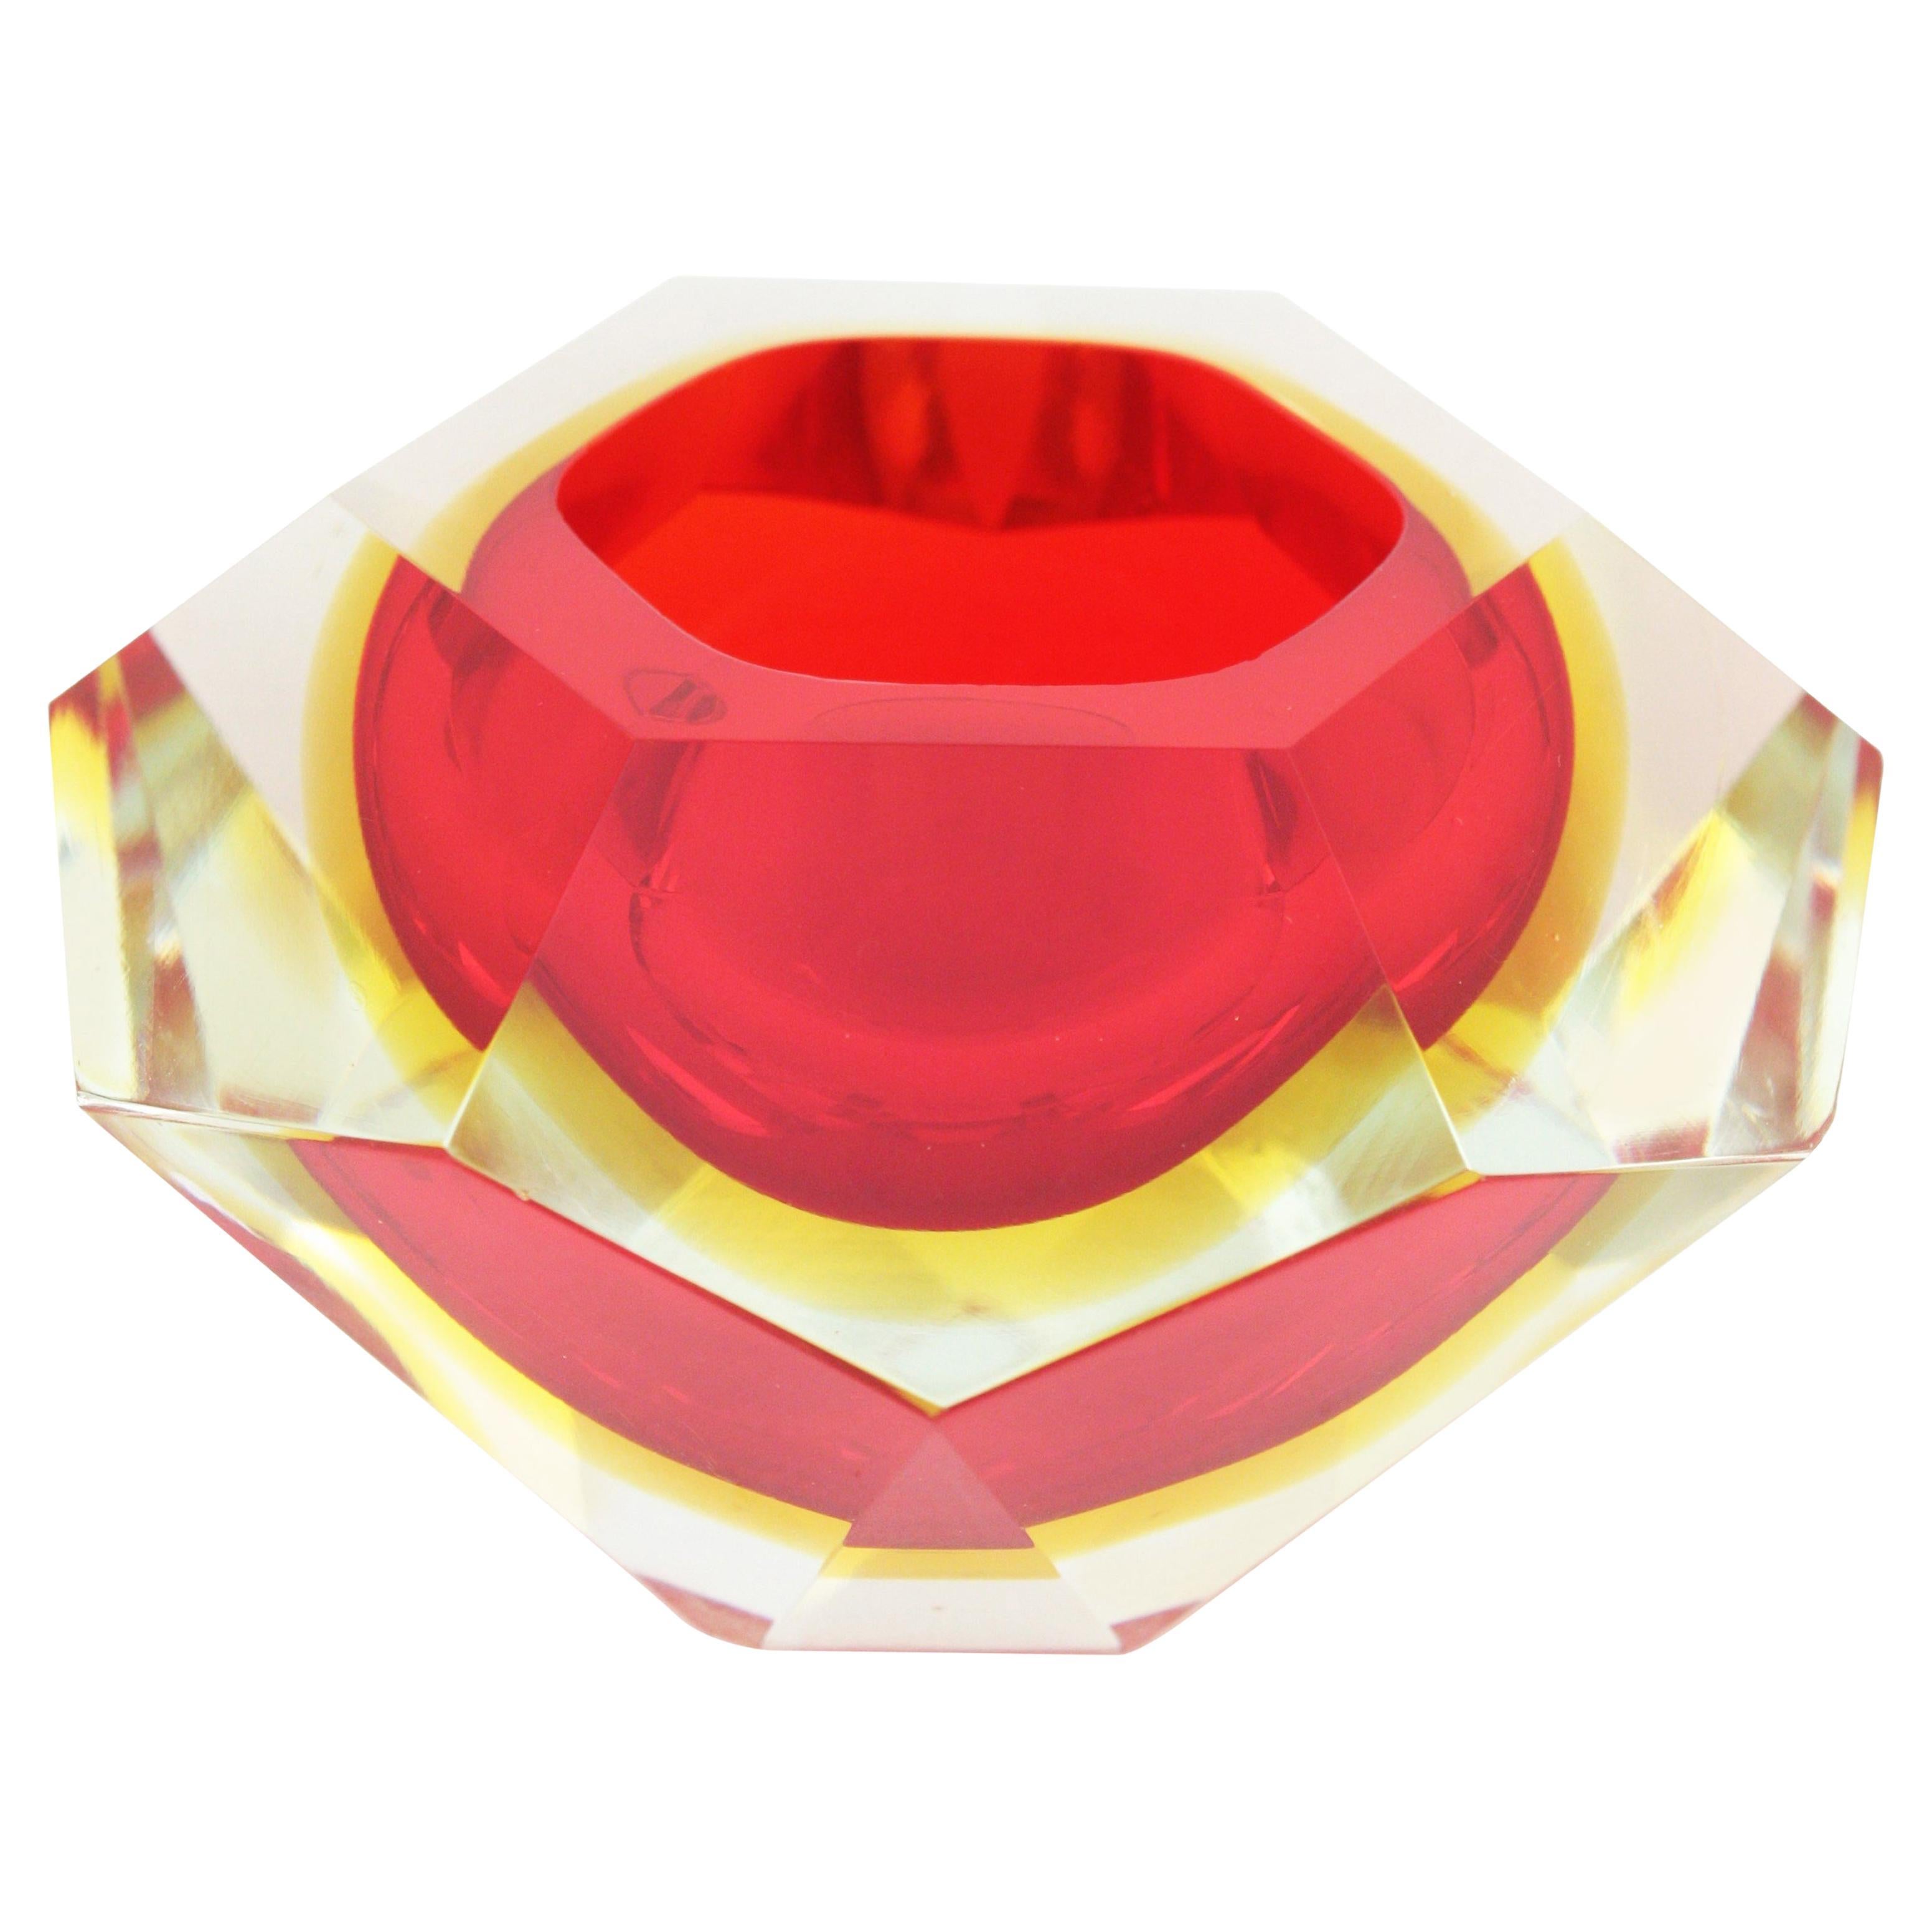 Flavio Poli Murano Red, Yellow and Clear Faceted Glass Diamond Bowl or Ashtray